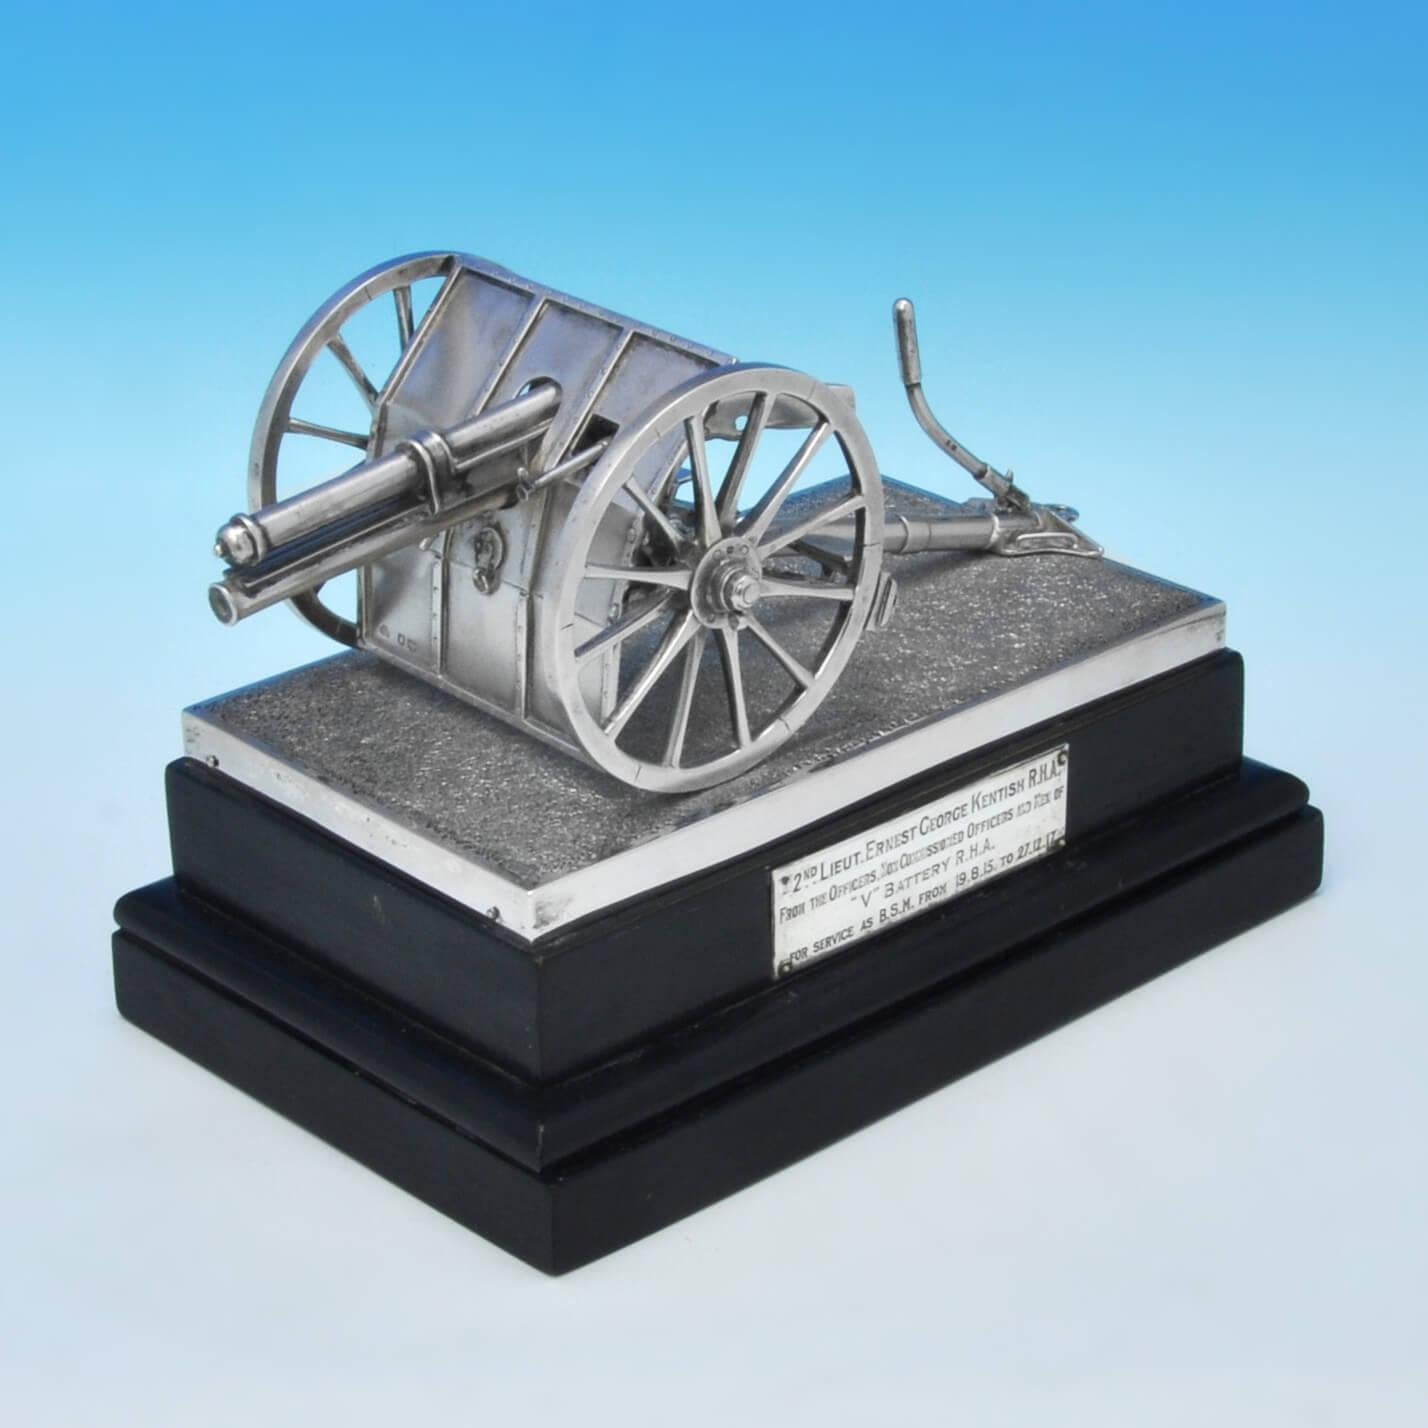 Hallmarked in London in 1919 by Goldsmiths & Silversmiths Co., this Sterling Silver Model of a Field Gun is particularly well crafted, with fine attention to detail. The model measures 9.5 inches (24cm) wide, 5 inches (12.5cm) deep and 6 inches